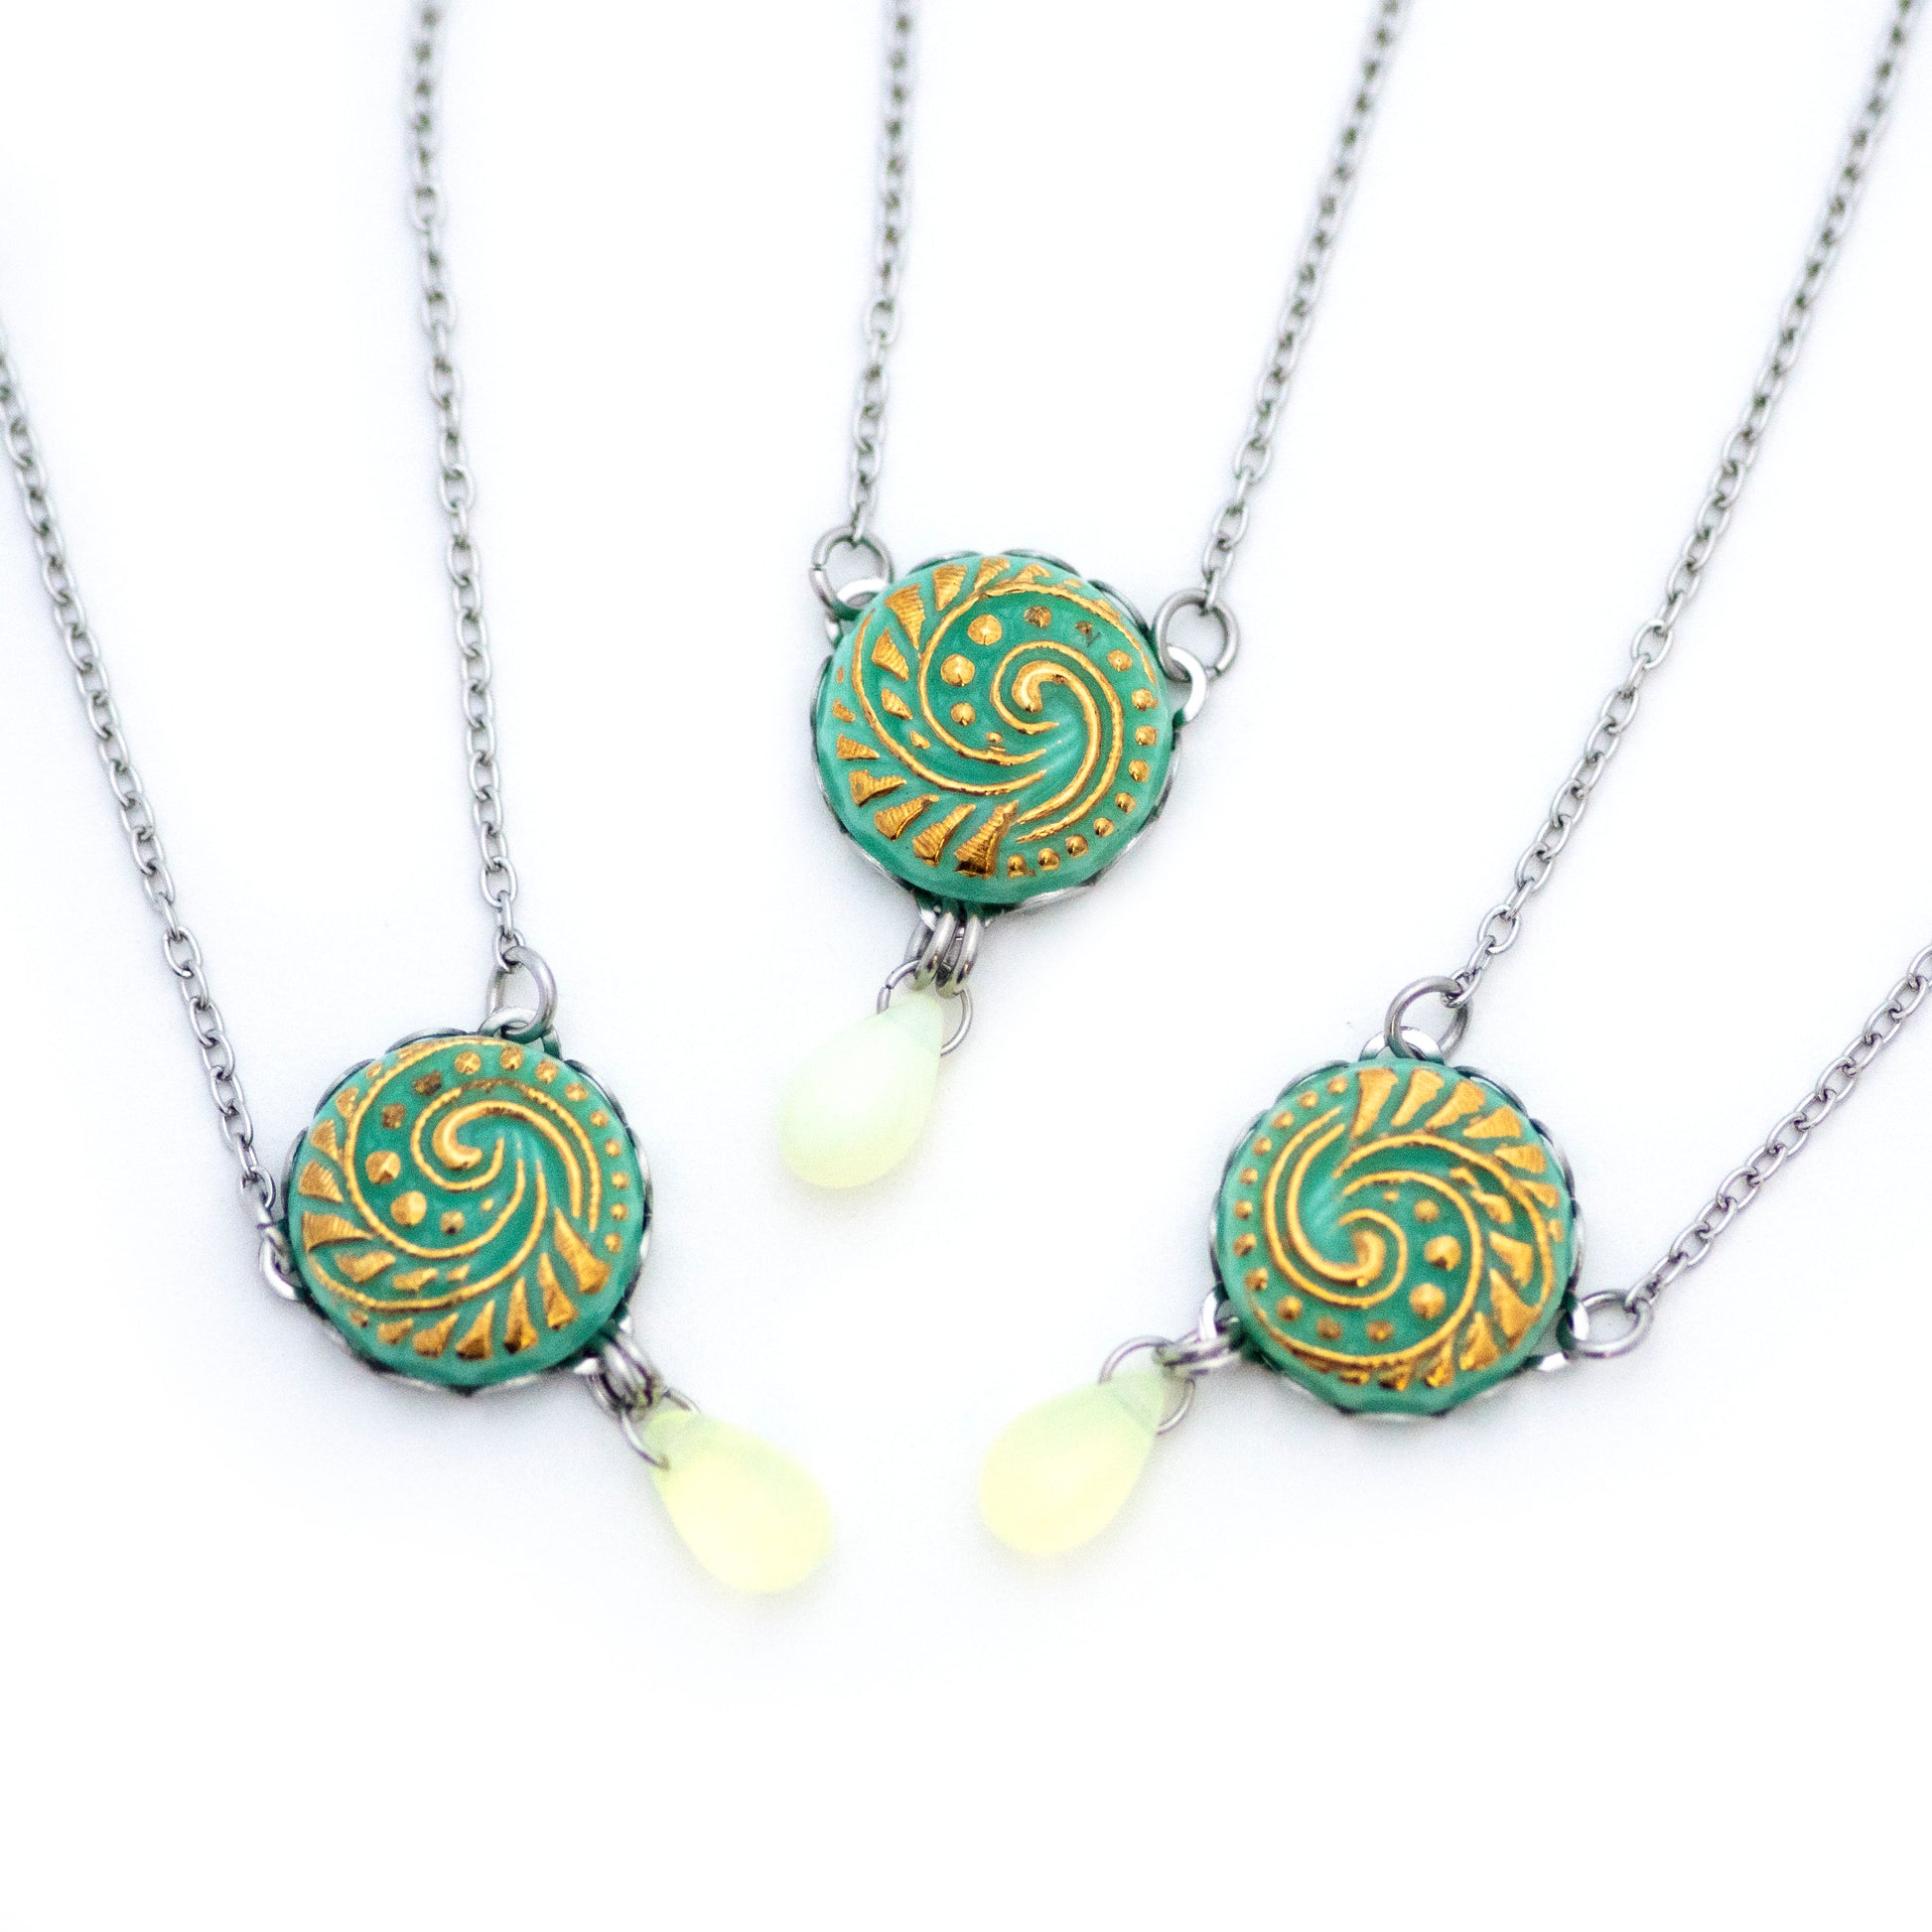 Three button pendant necklaces. Uranium glass button in light turquoise color.  Uranium glass button contains 2% uranium dioxide. This small amount in the glass allows it to fluoresce (glow) green under a black light and is also safe to wear.